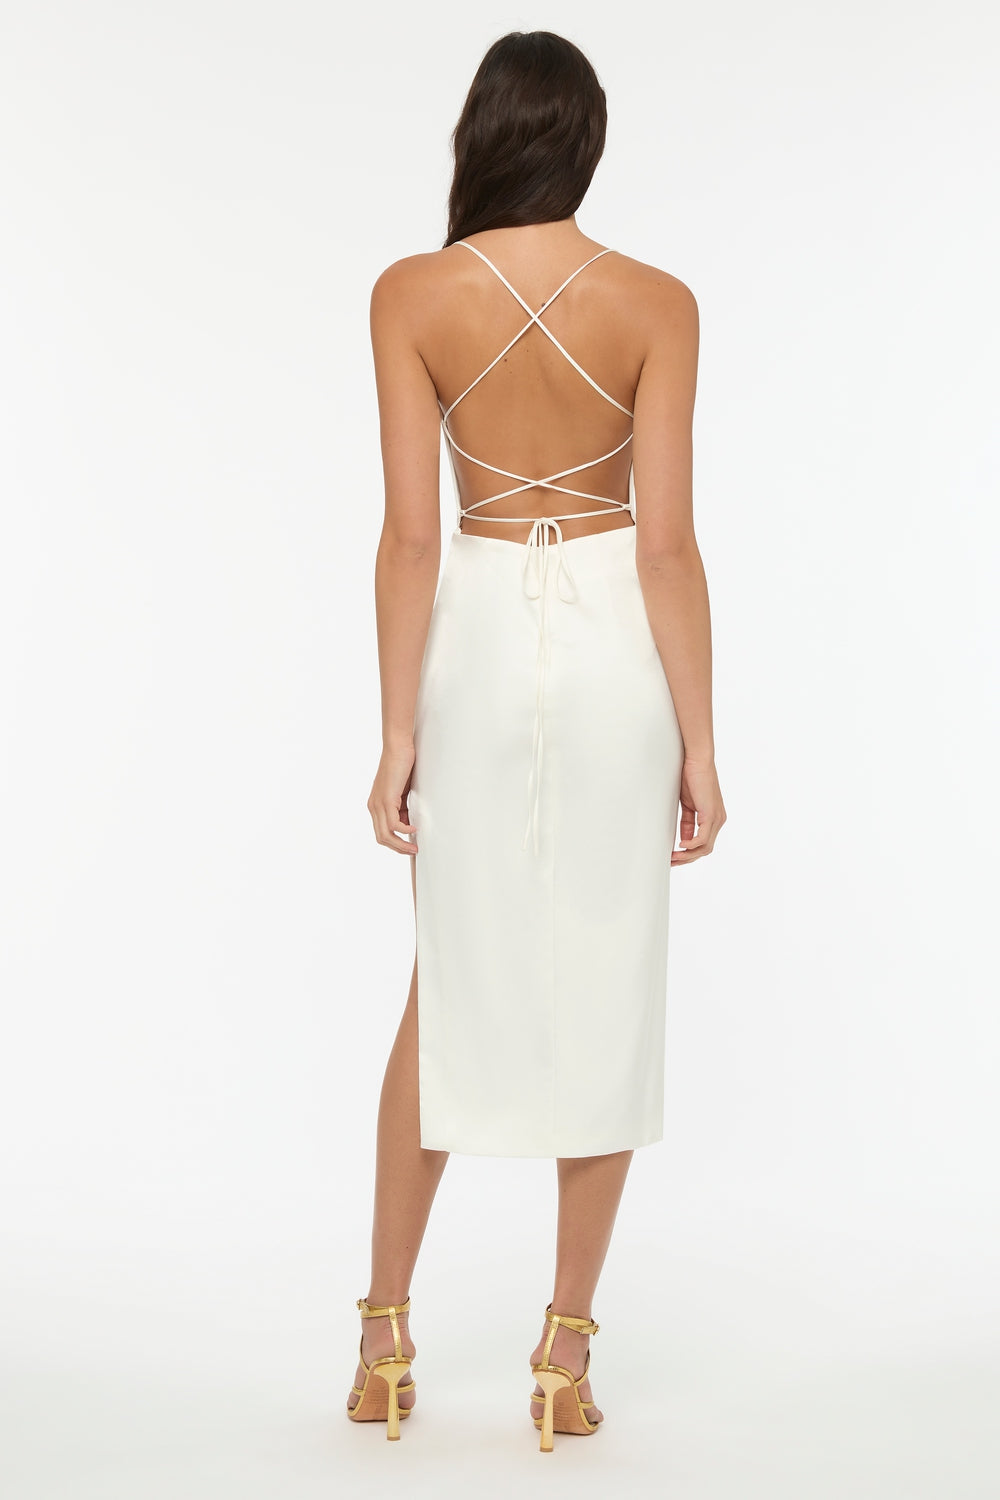 A Better Place Backless Dress White – Styched Fashion